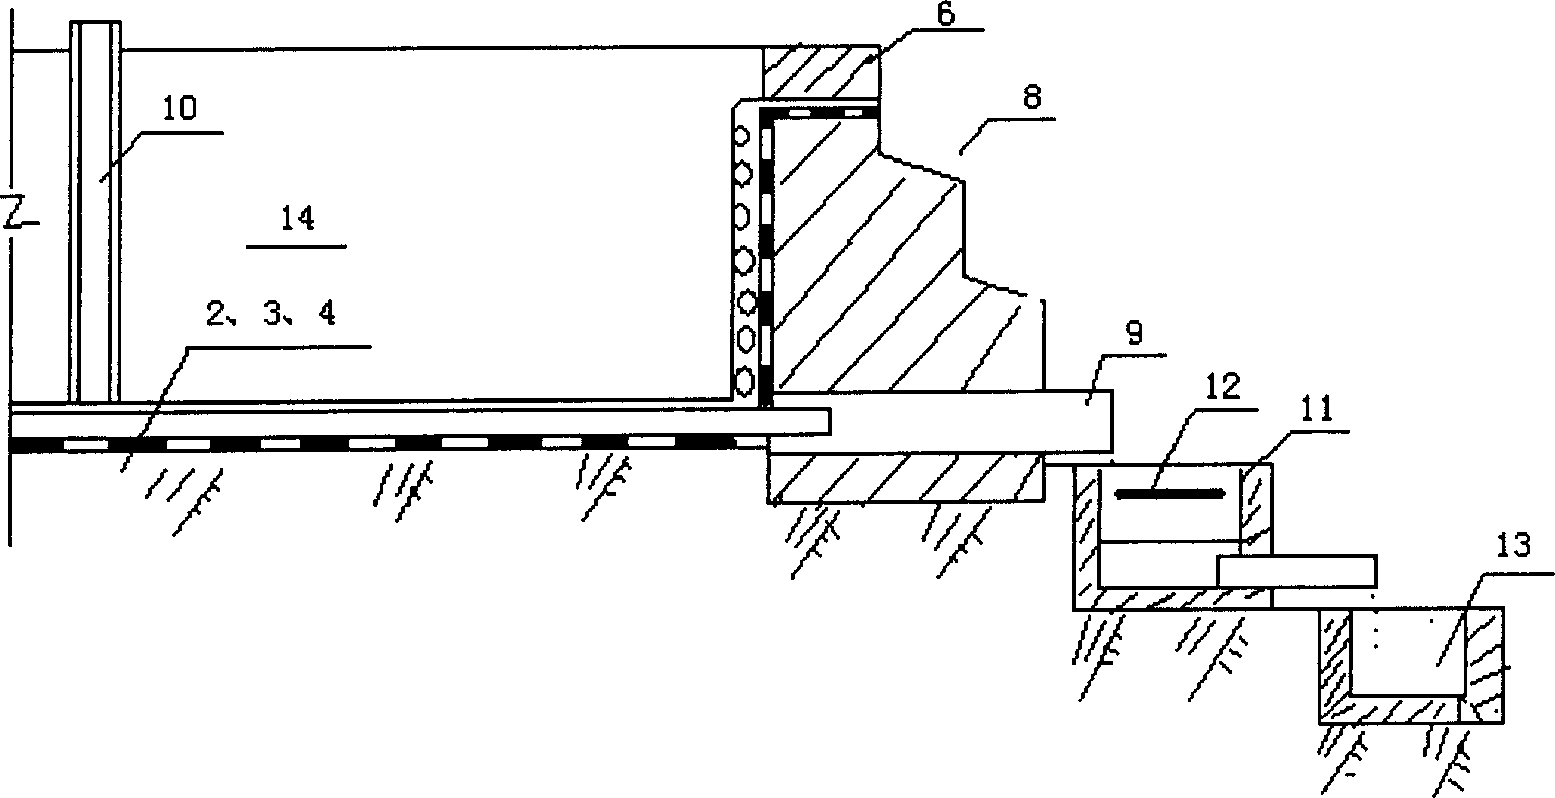 Tail ore stock area structure with sewage percolation and resource regeneration